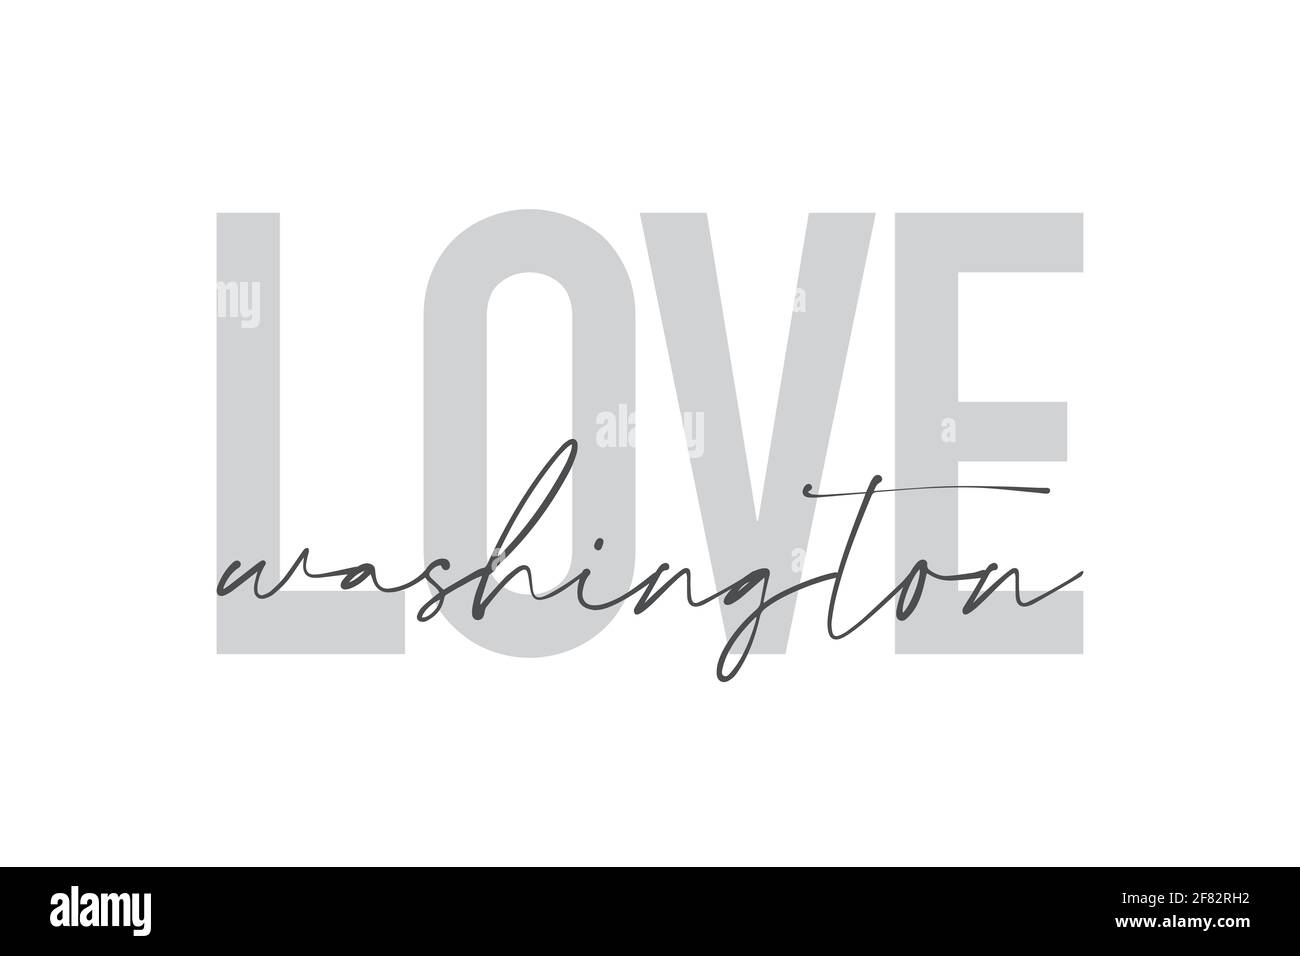 Modern, urban, simple graphic design of a saying 'Love Washington' in grey colors. Trendy, cool, handwritten typography Stock Photo